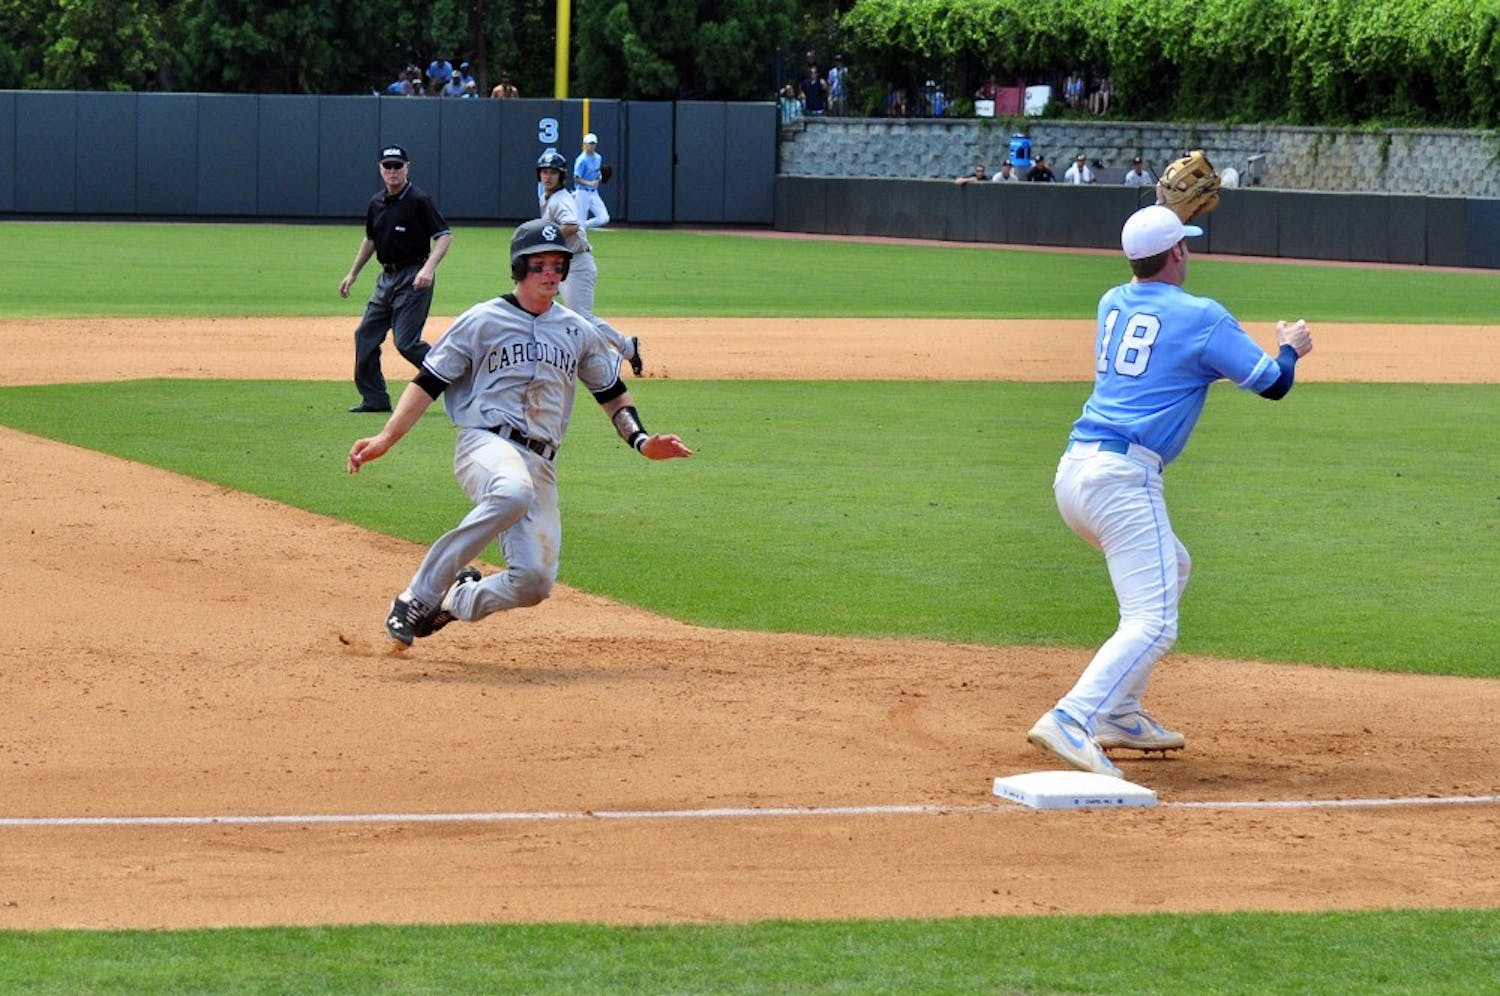 Grayson Greiner gets tagged out while sliding into third base.